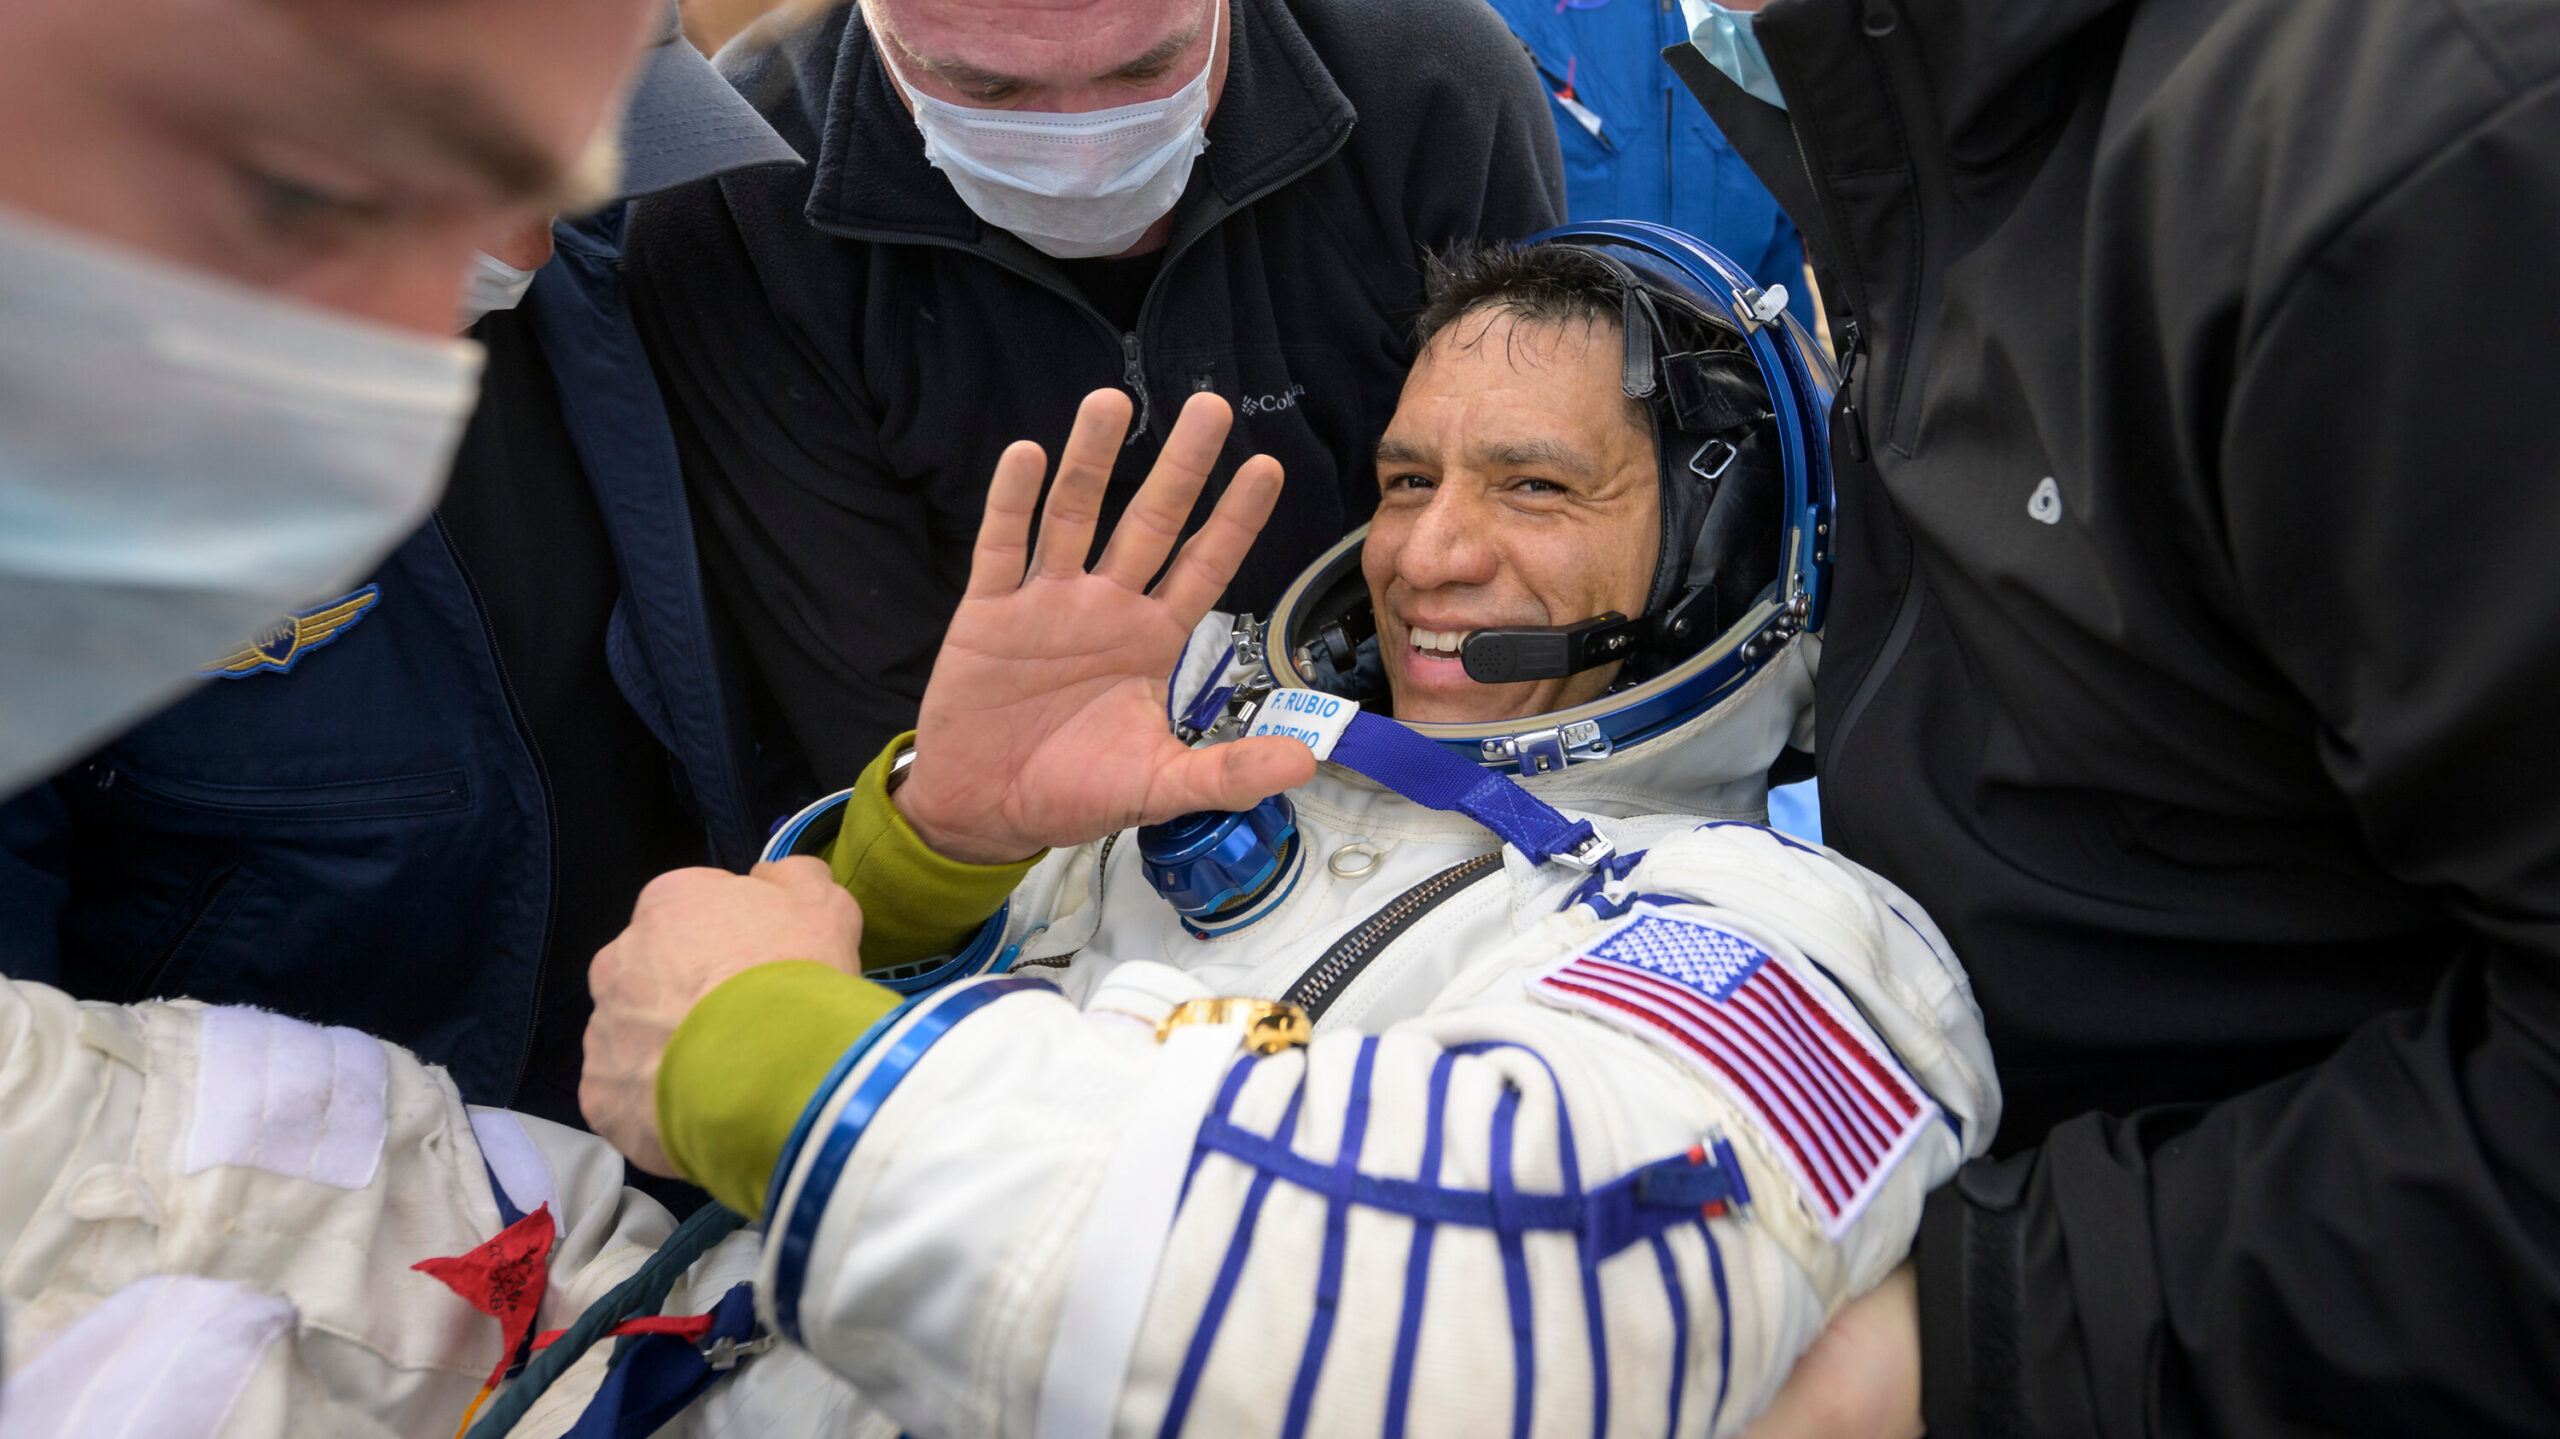 Astronaut Frank Rubio Returns Home After a Year-Plus in Space